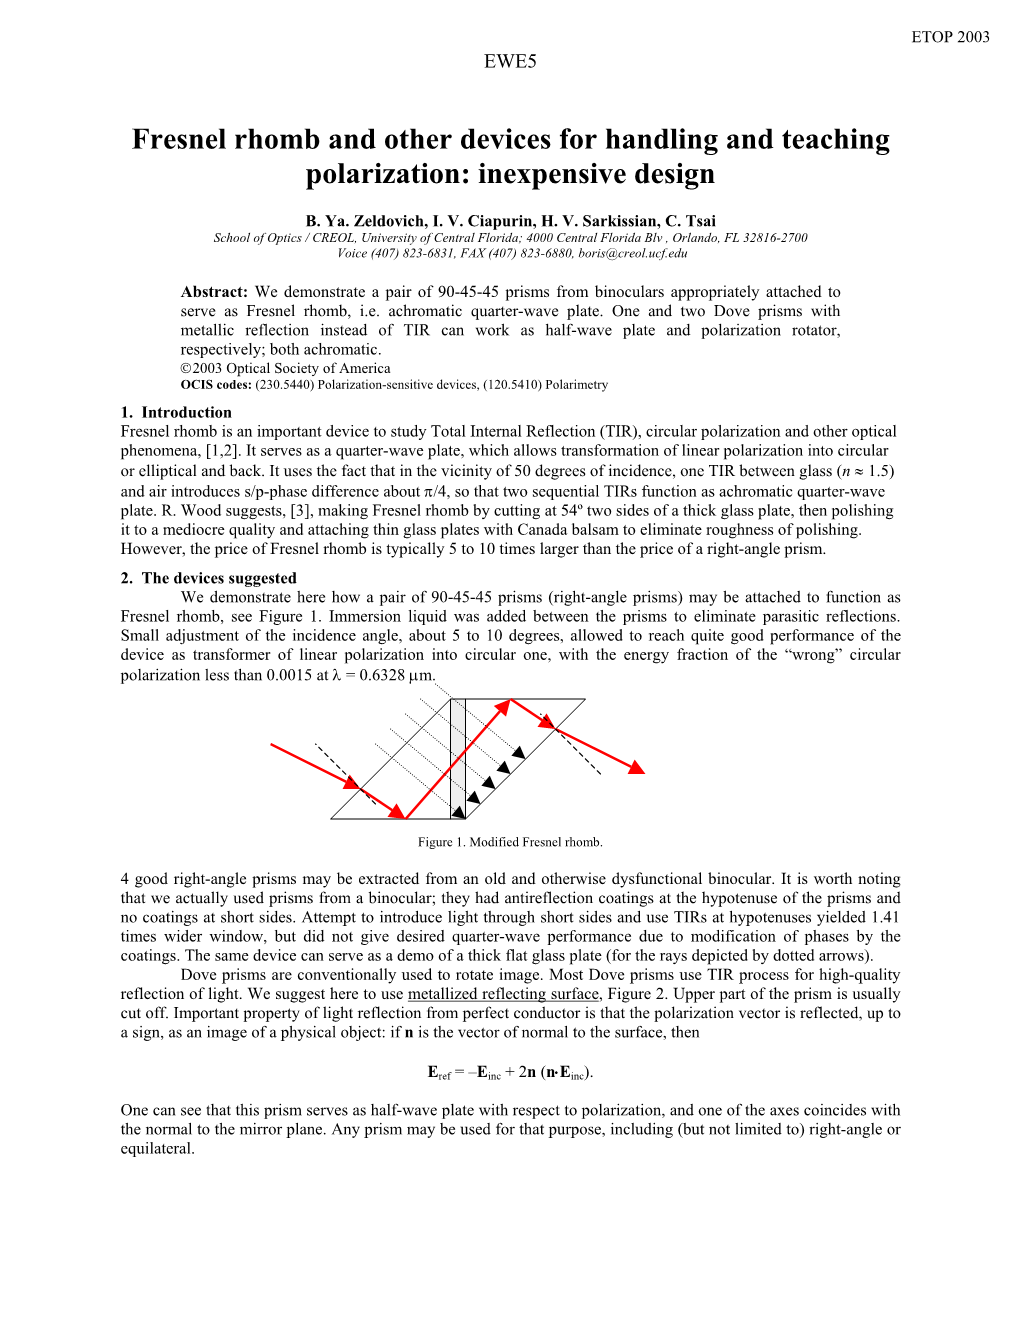 Fresnel Rhomb and Other Devices for Handling and Teaching Polarization: Inexpensive Design